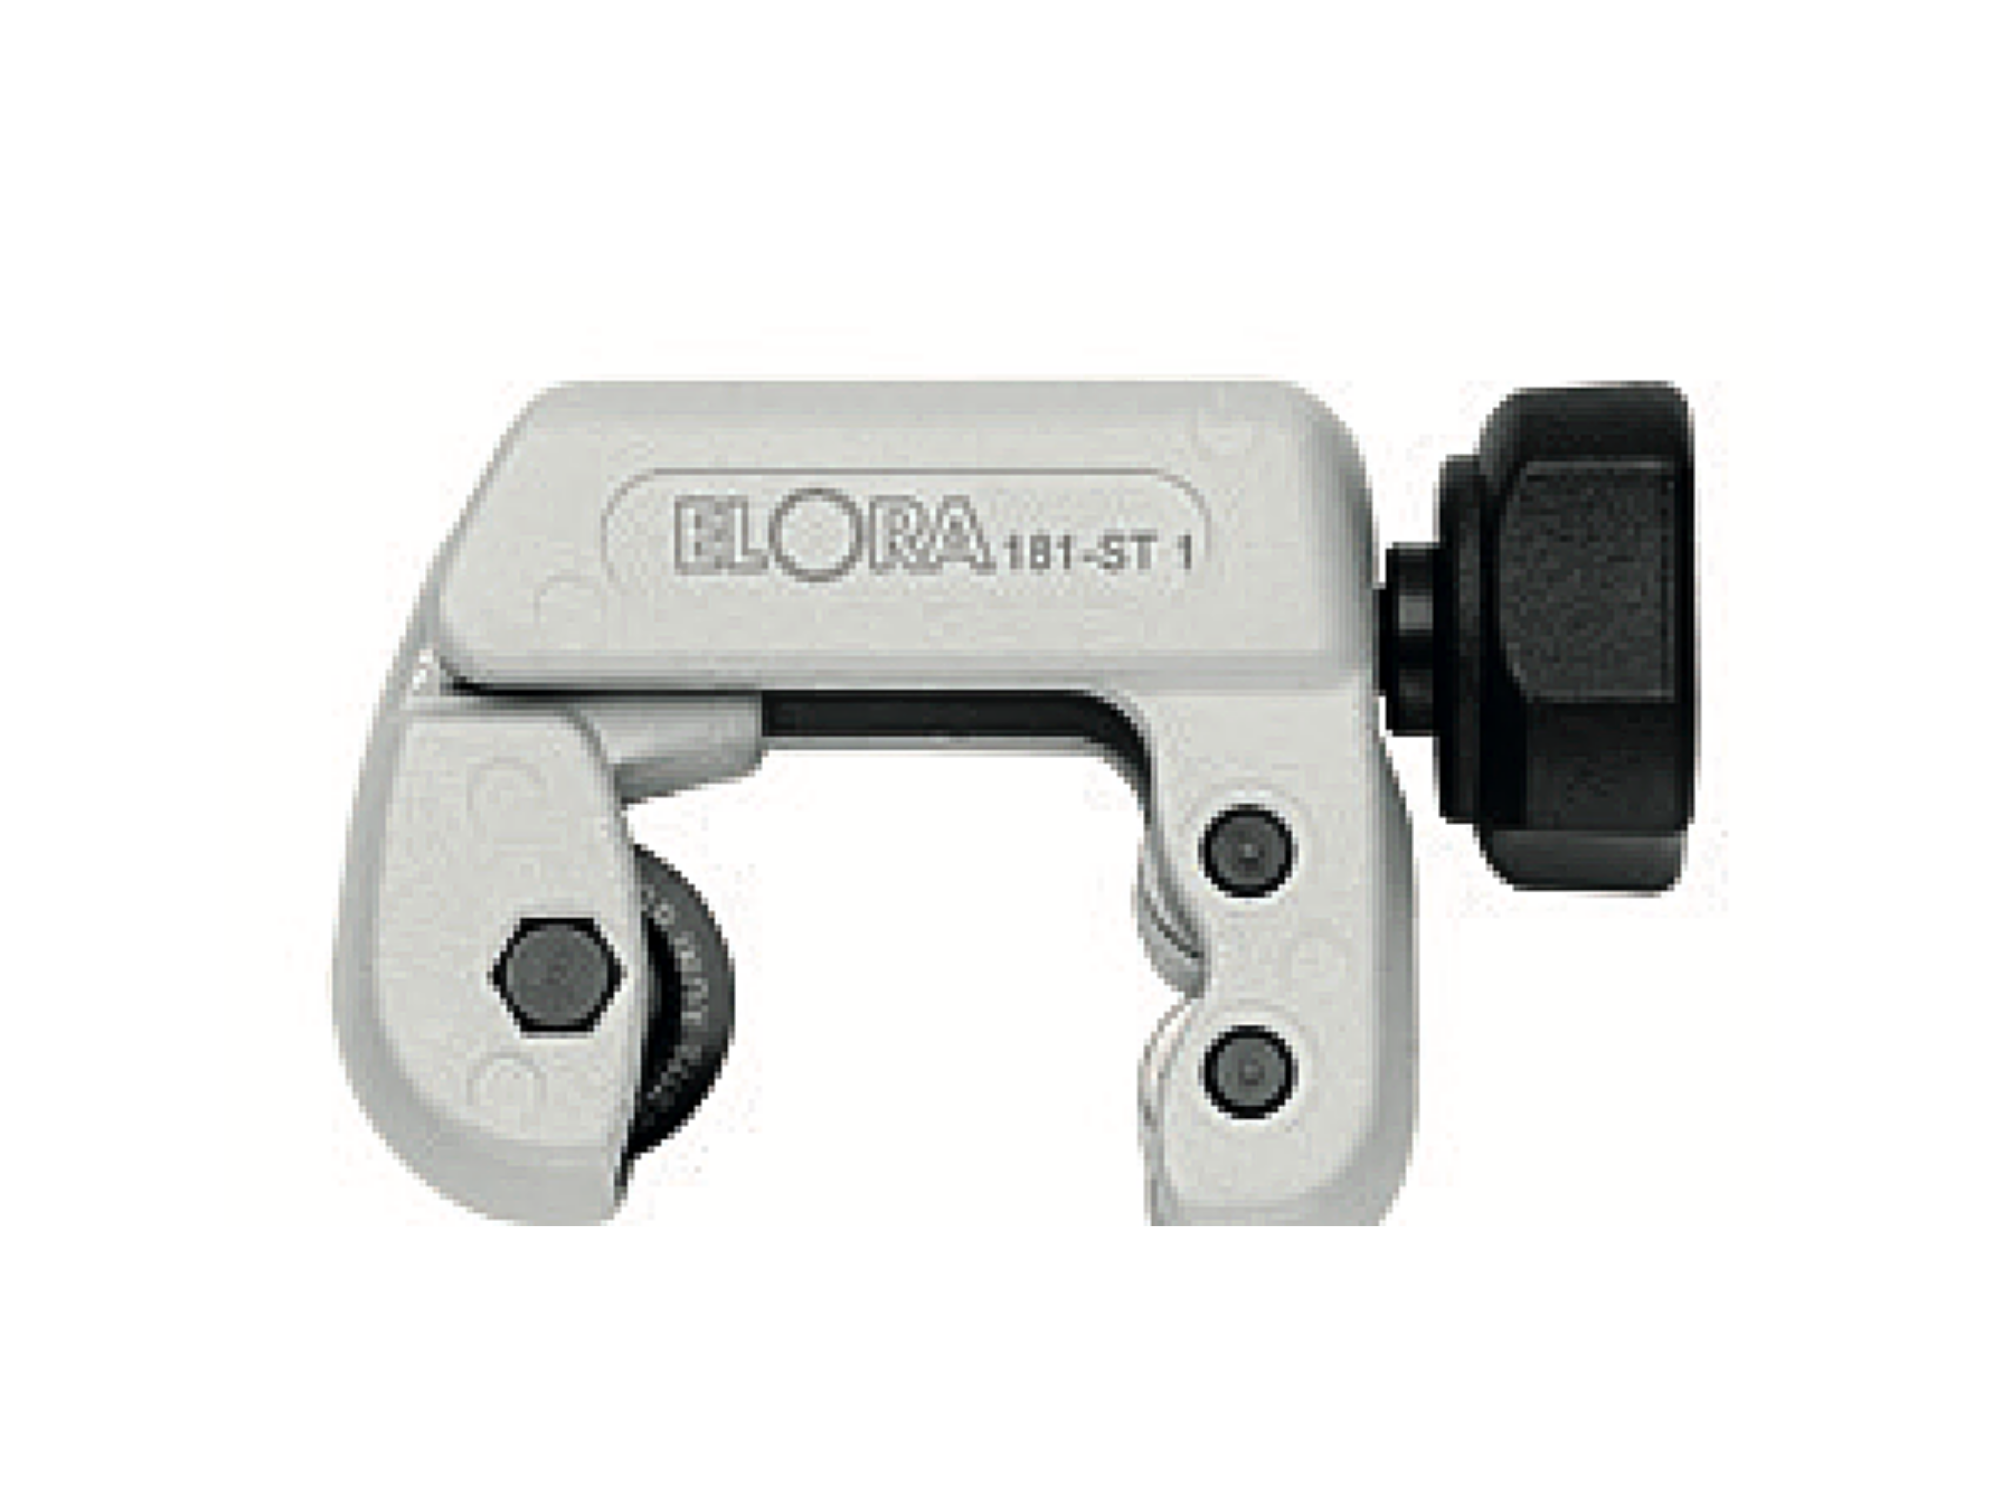 ELORA 181-ST3 Pipe Cutter For Thin-Walled Metal Tube 6-76 mm - Premium Pipe Cutter from ELORA - Shop now at Yew Aik.